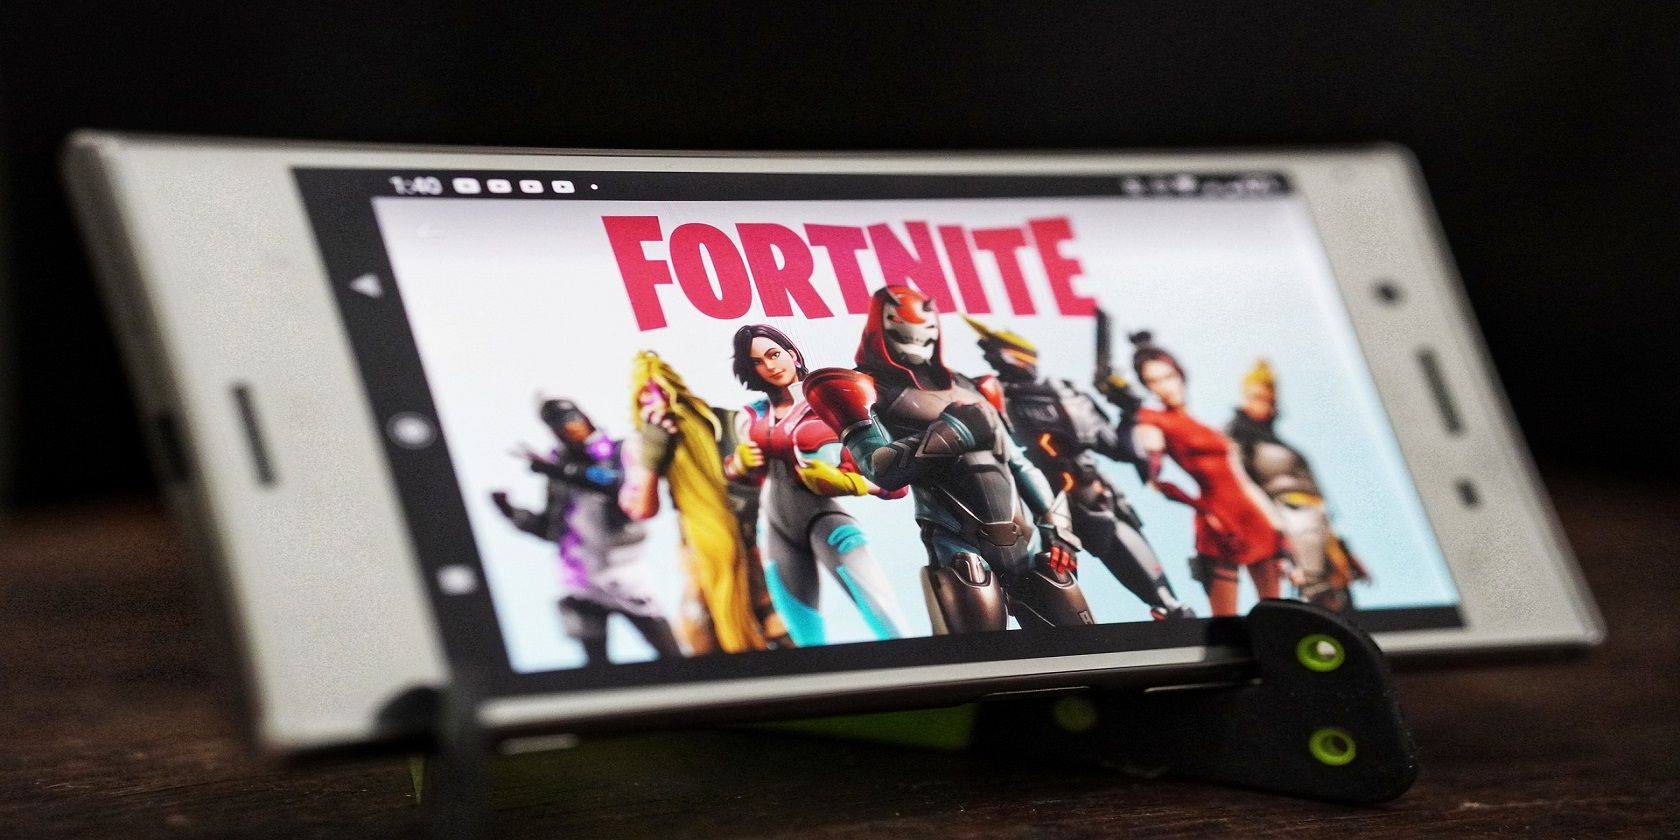 Fortnite is coming back to iOS thanks to Nvidia's cloud gaming web app